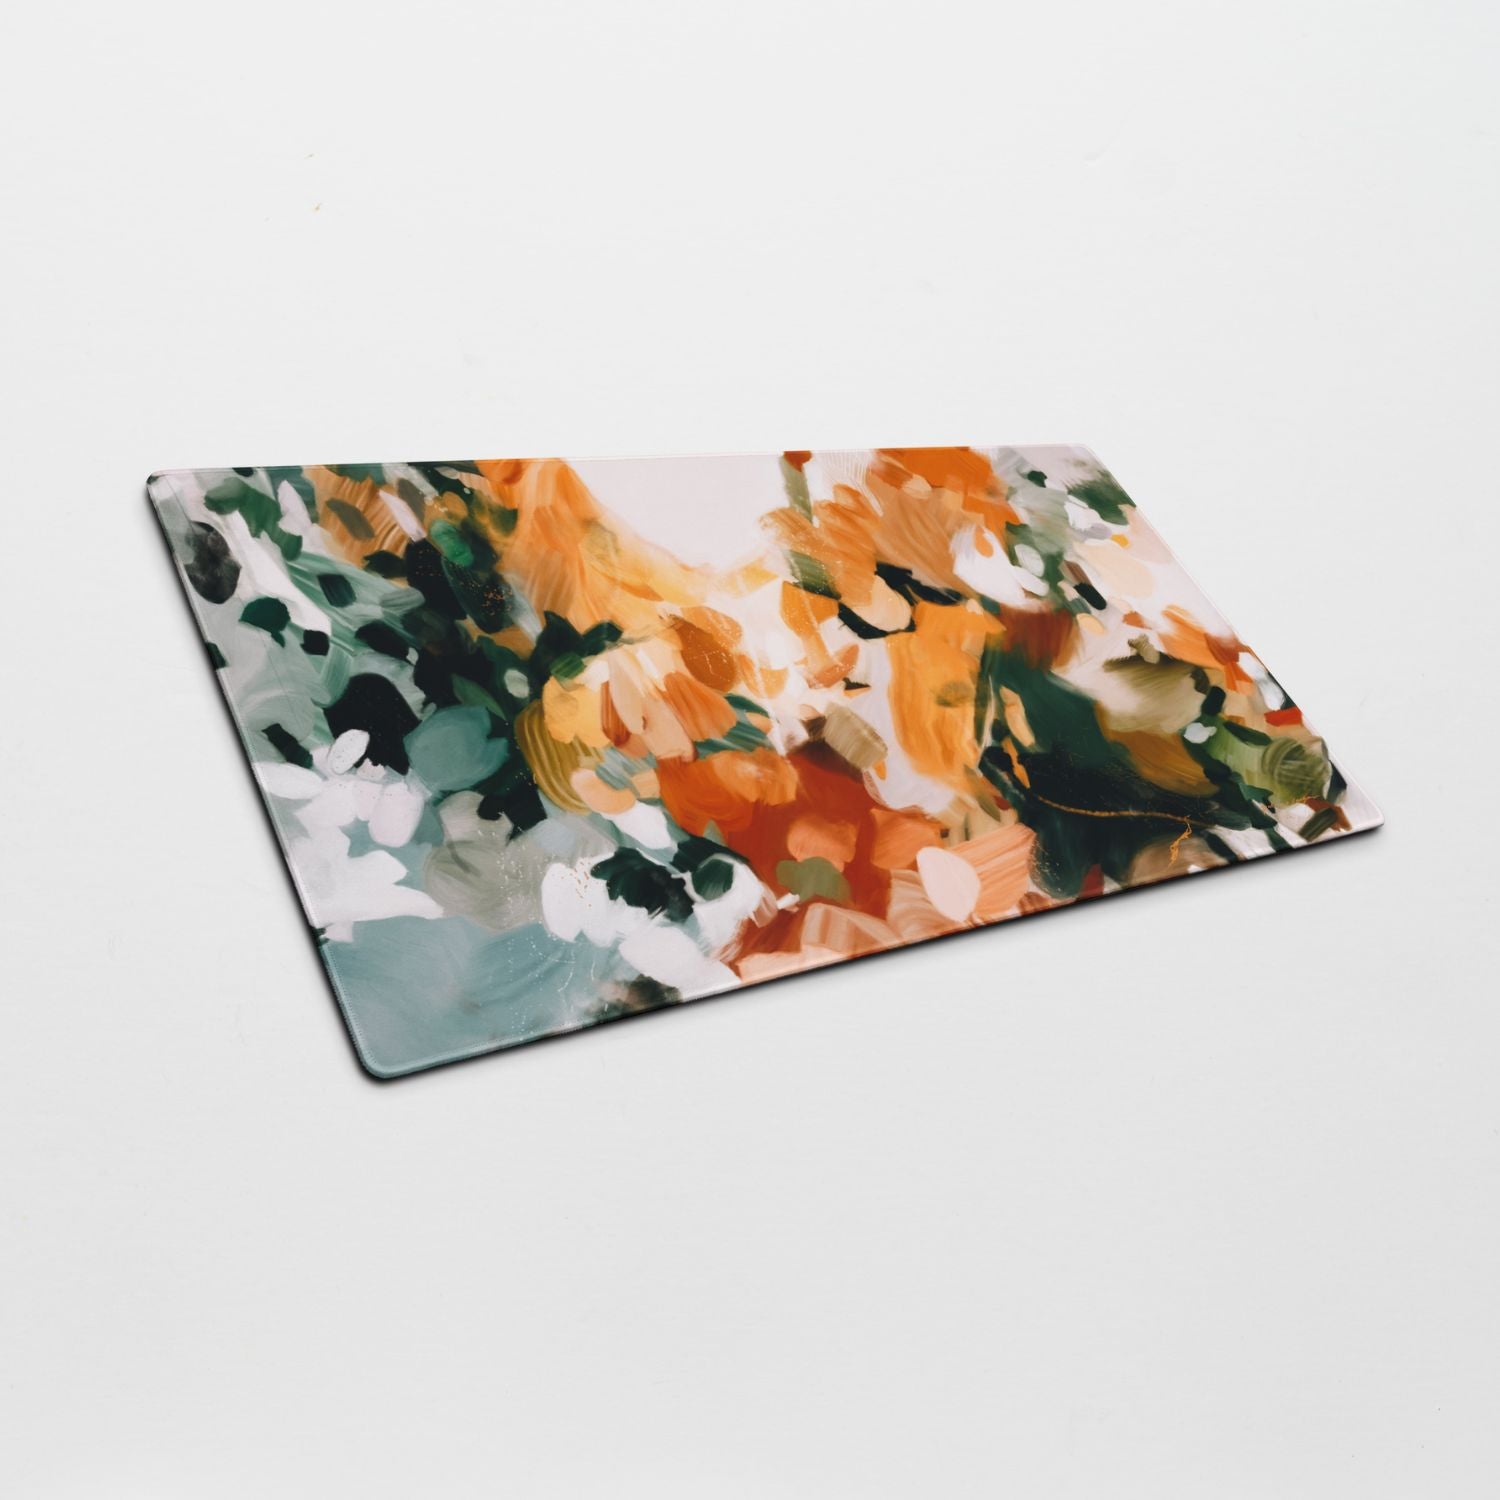 Aspen, colorful desk mat for styling your office desk. Featuring artwork by Parima Studio. Home office styling accessories, cubicle styling accessories.